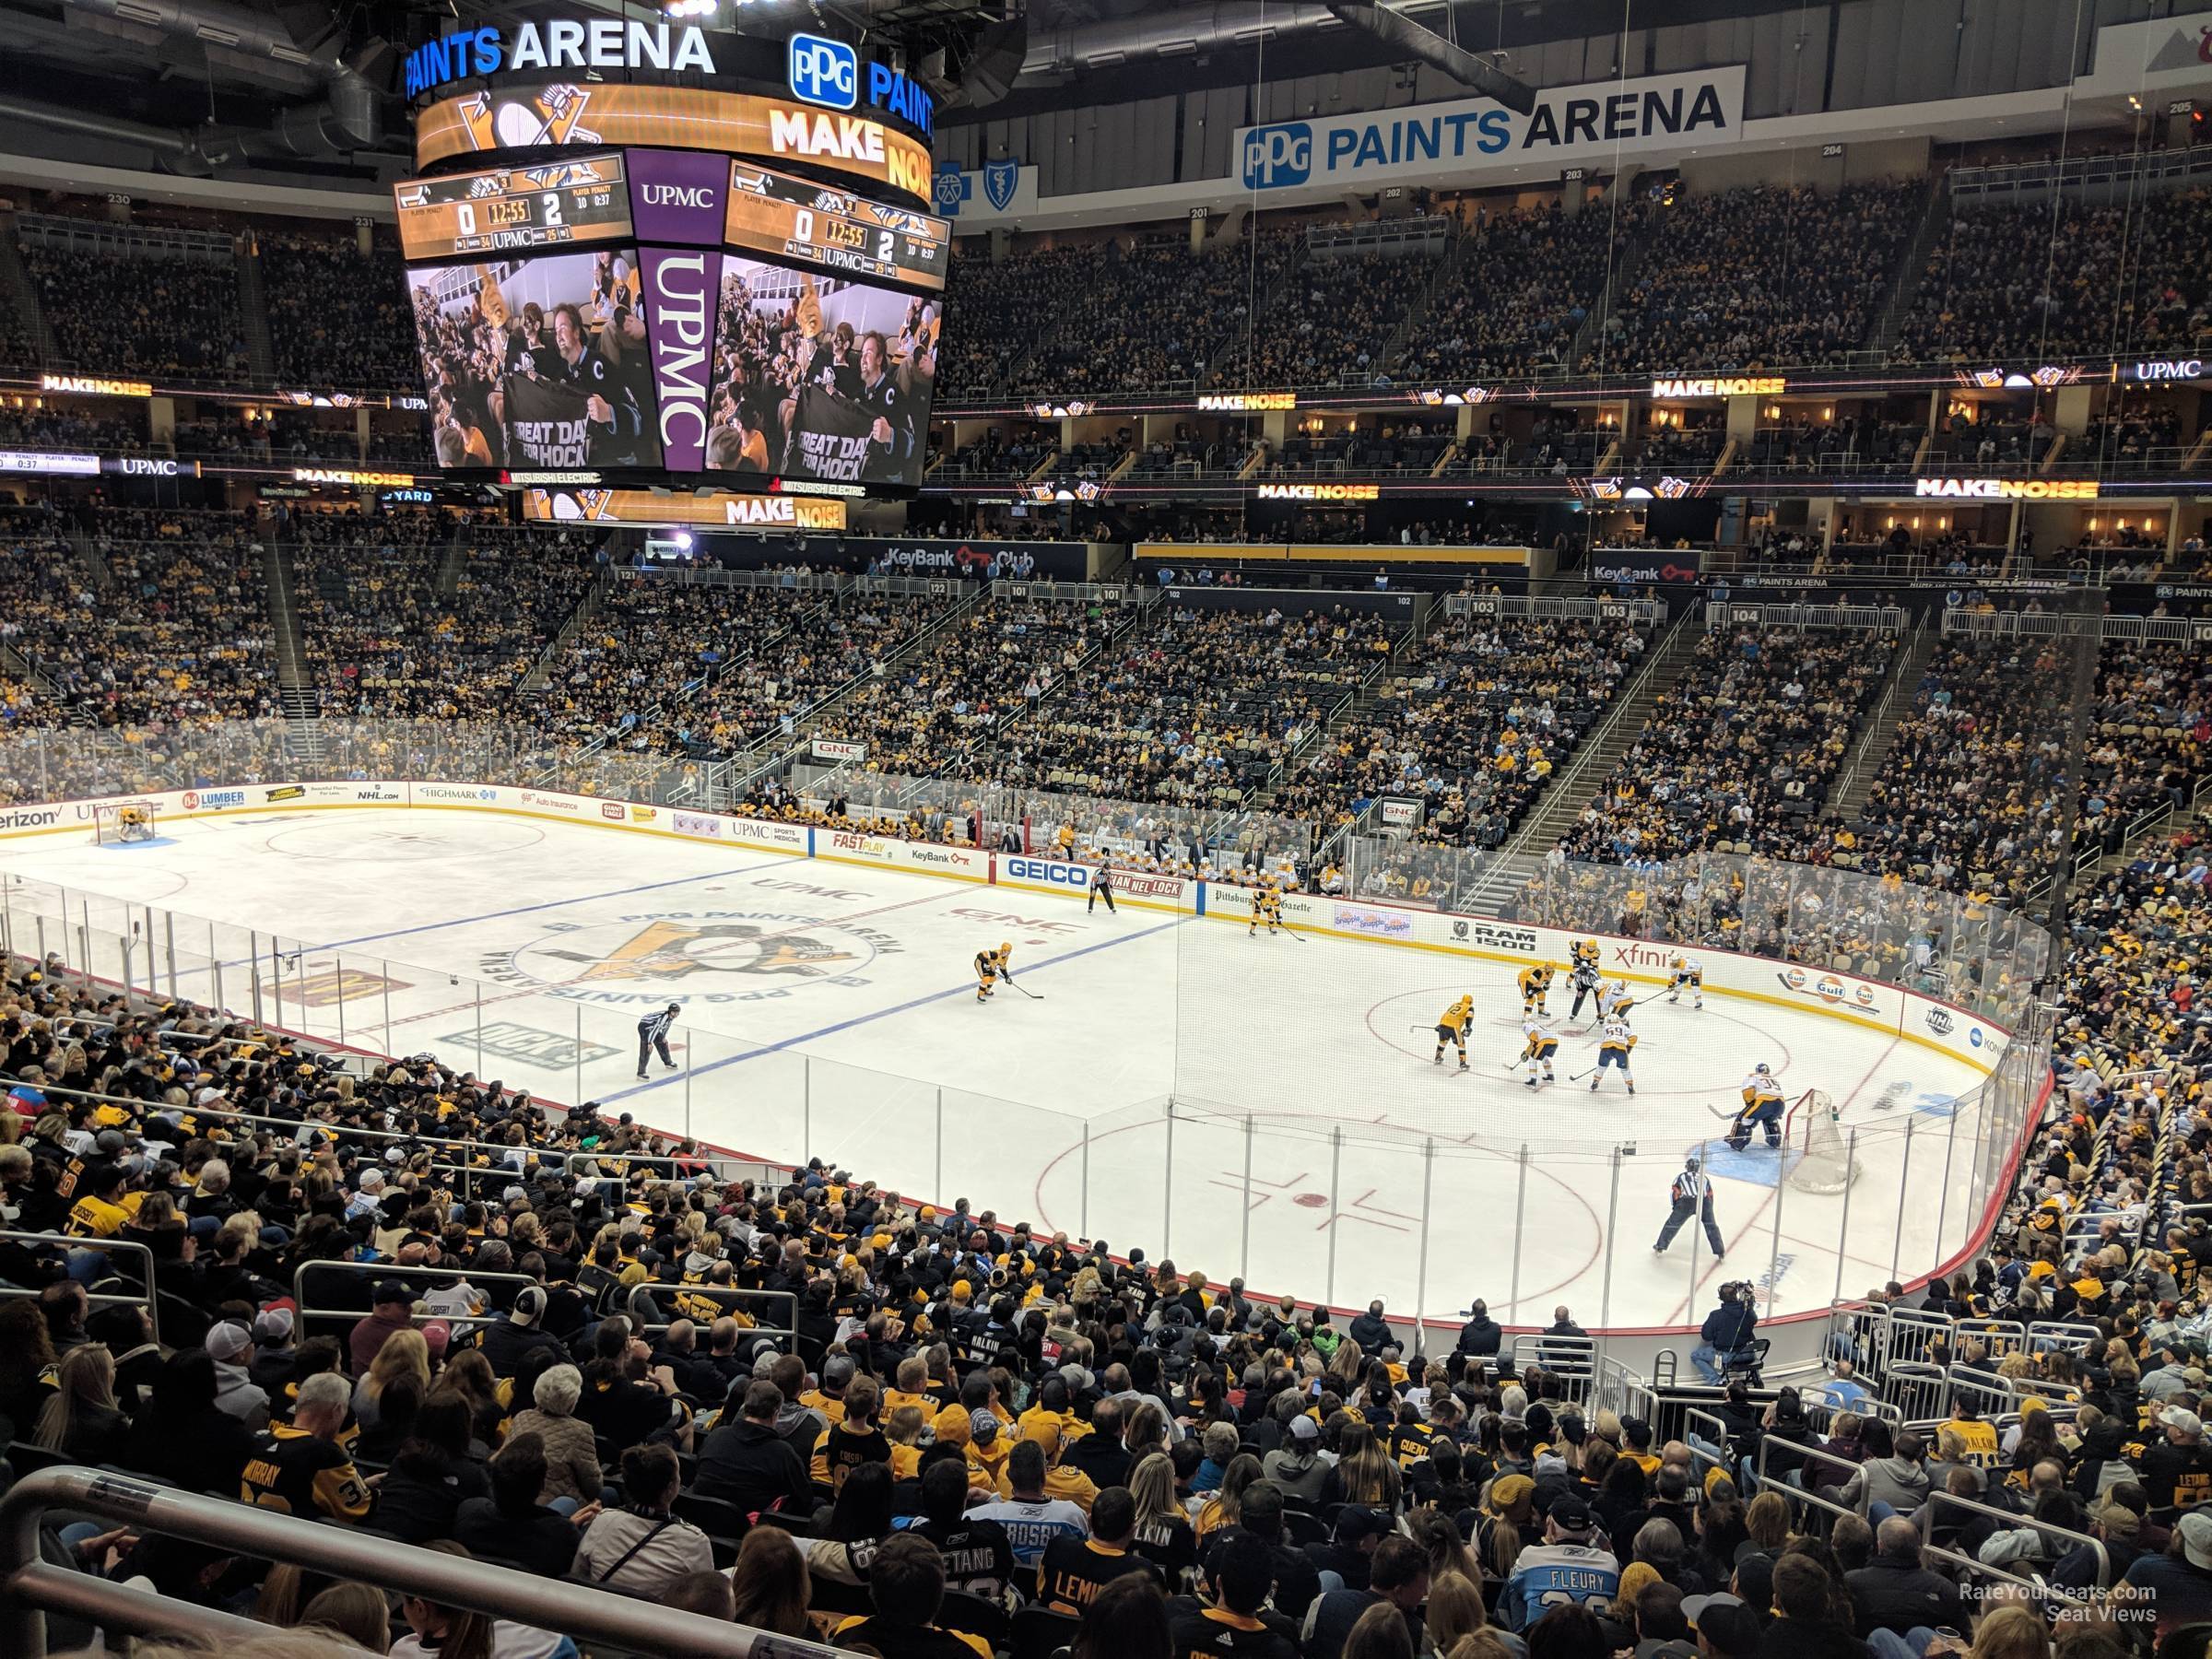 section 110, row y seat view  for hockey - ppg paints arena